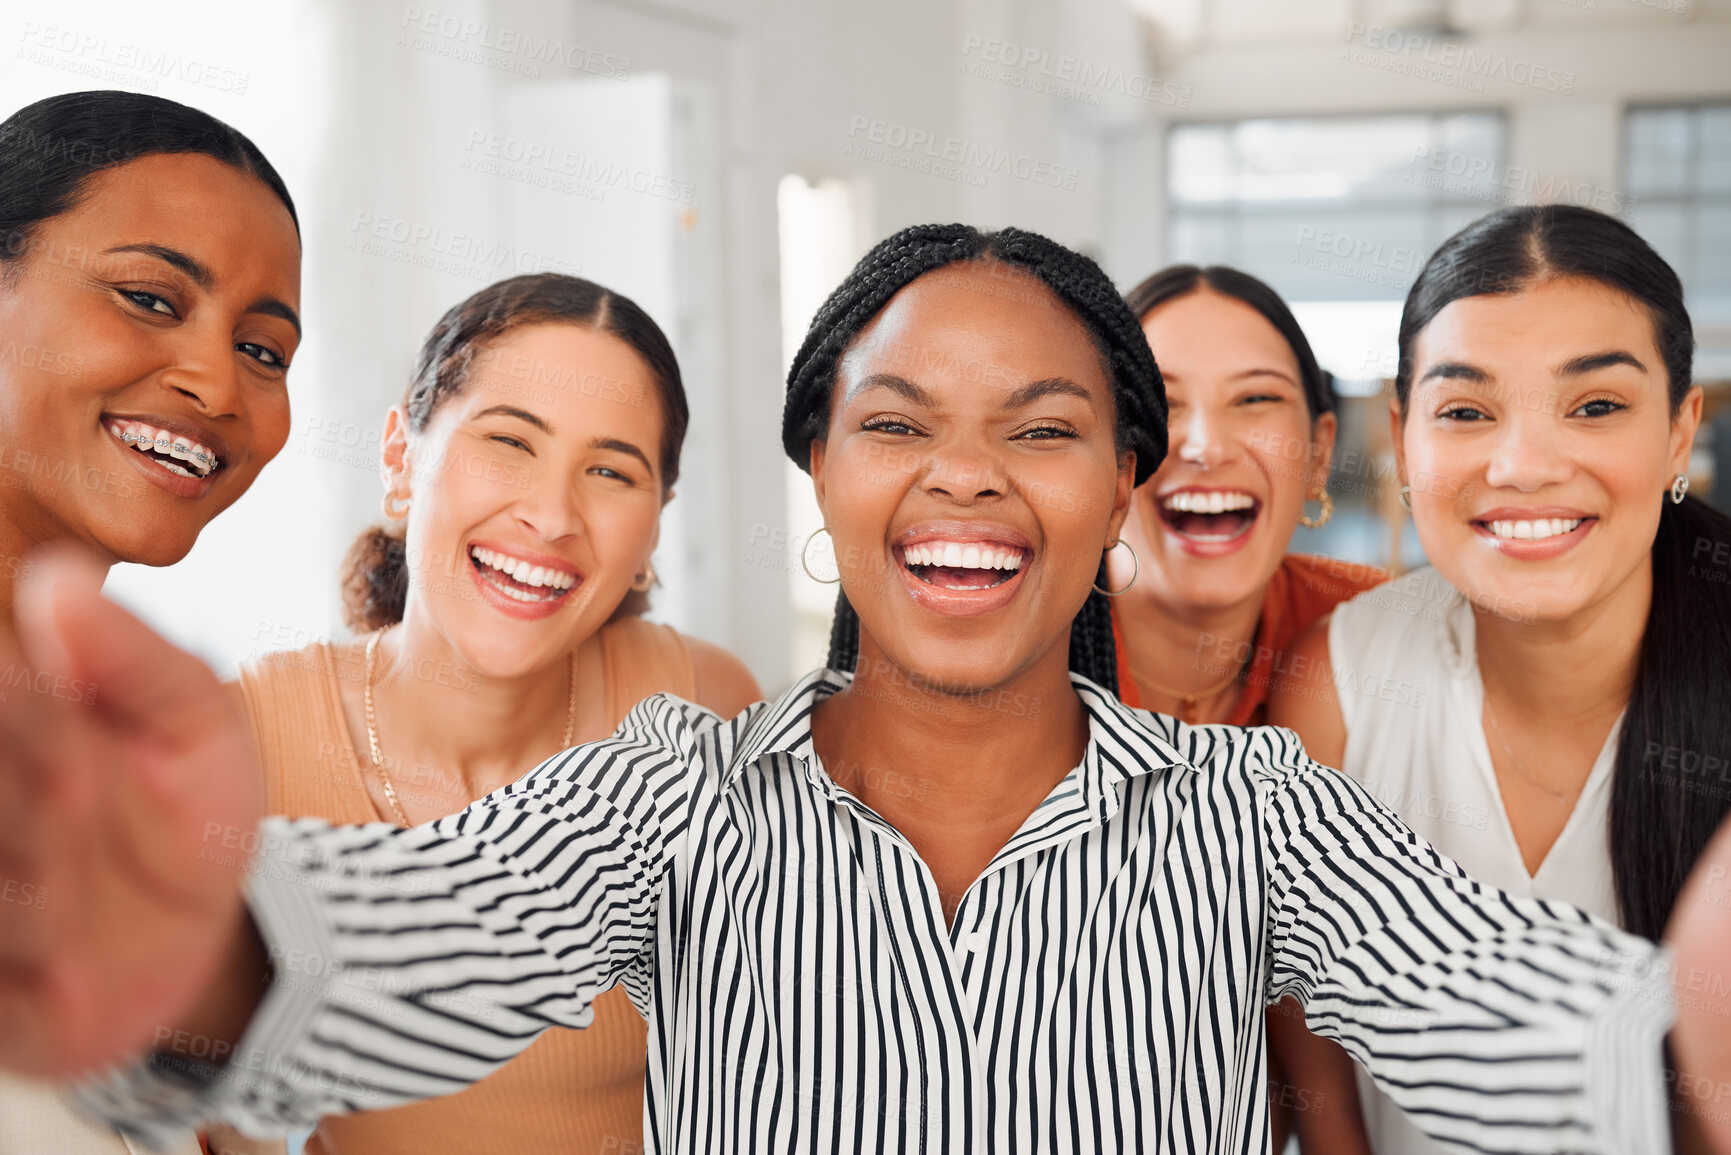 Buy stock photo Portrait of a diverse group of five cheerful businesswomen taking a selfie together at work. Joyful businesspeople taking a photo in an office. Women working in corporate taking a picture